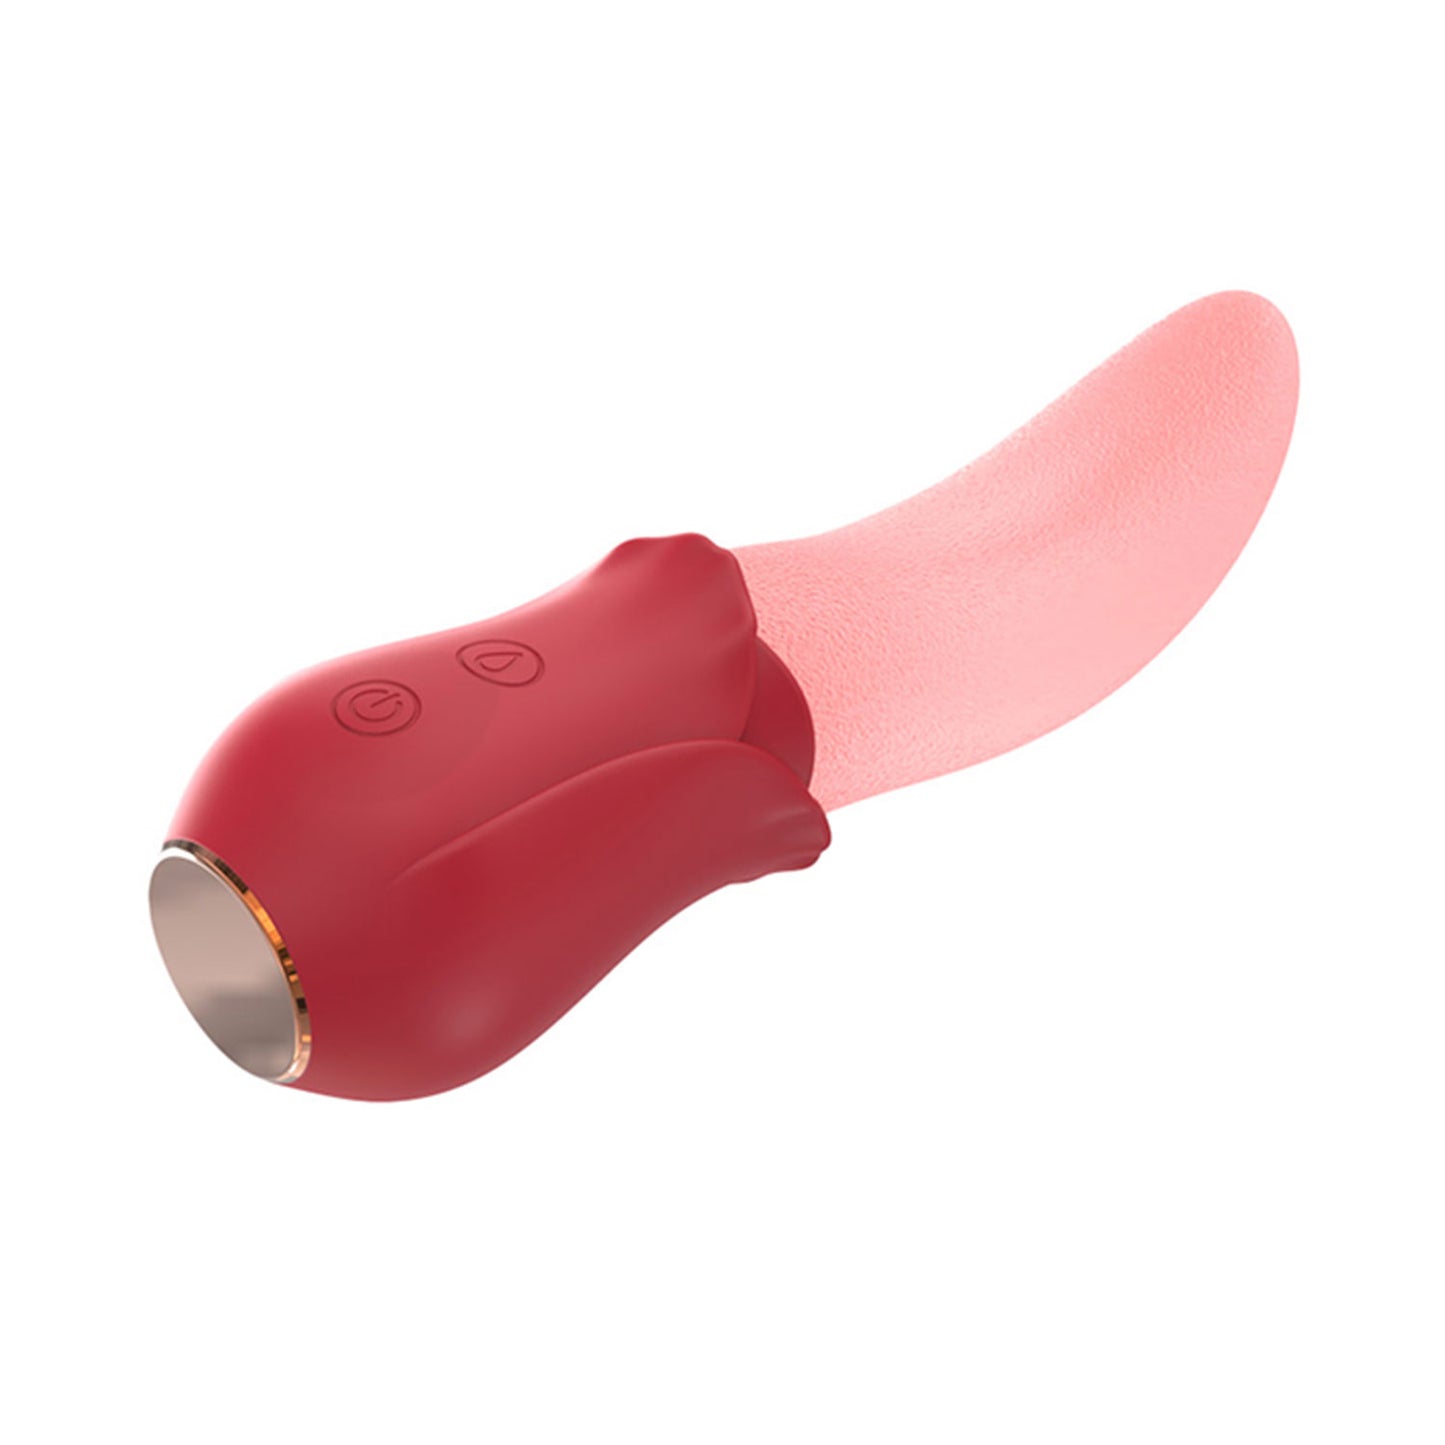 The Horny Company - Funky Fantasy Rechargeable Vibrating and Licking Tongue Vibrator